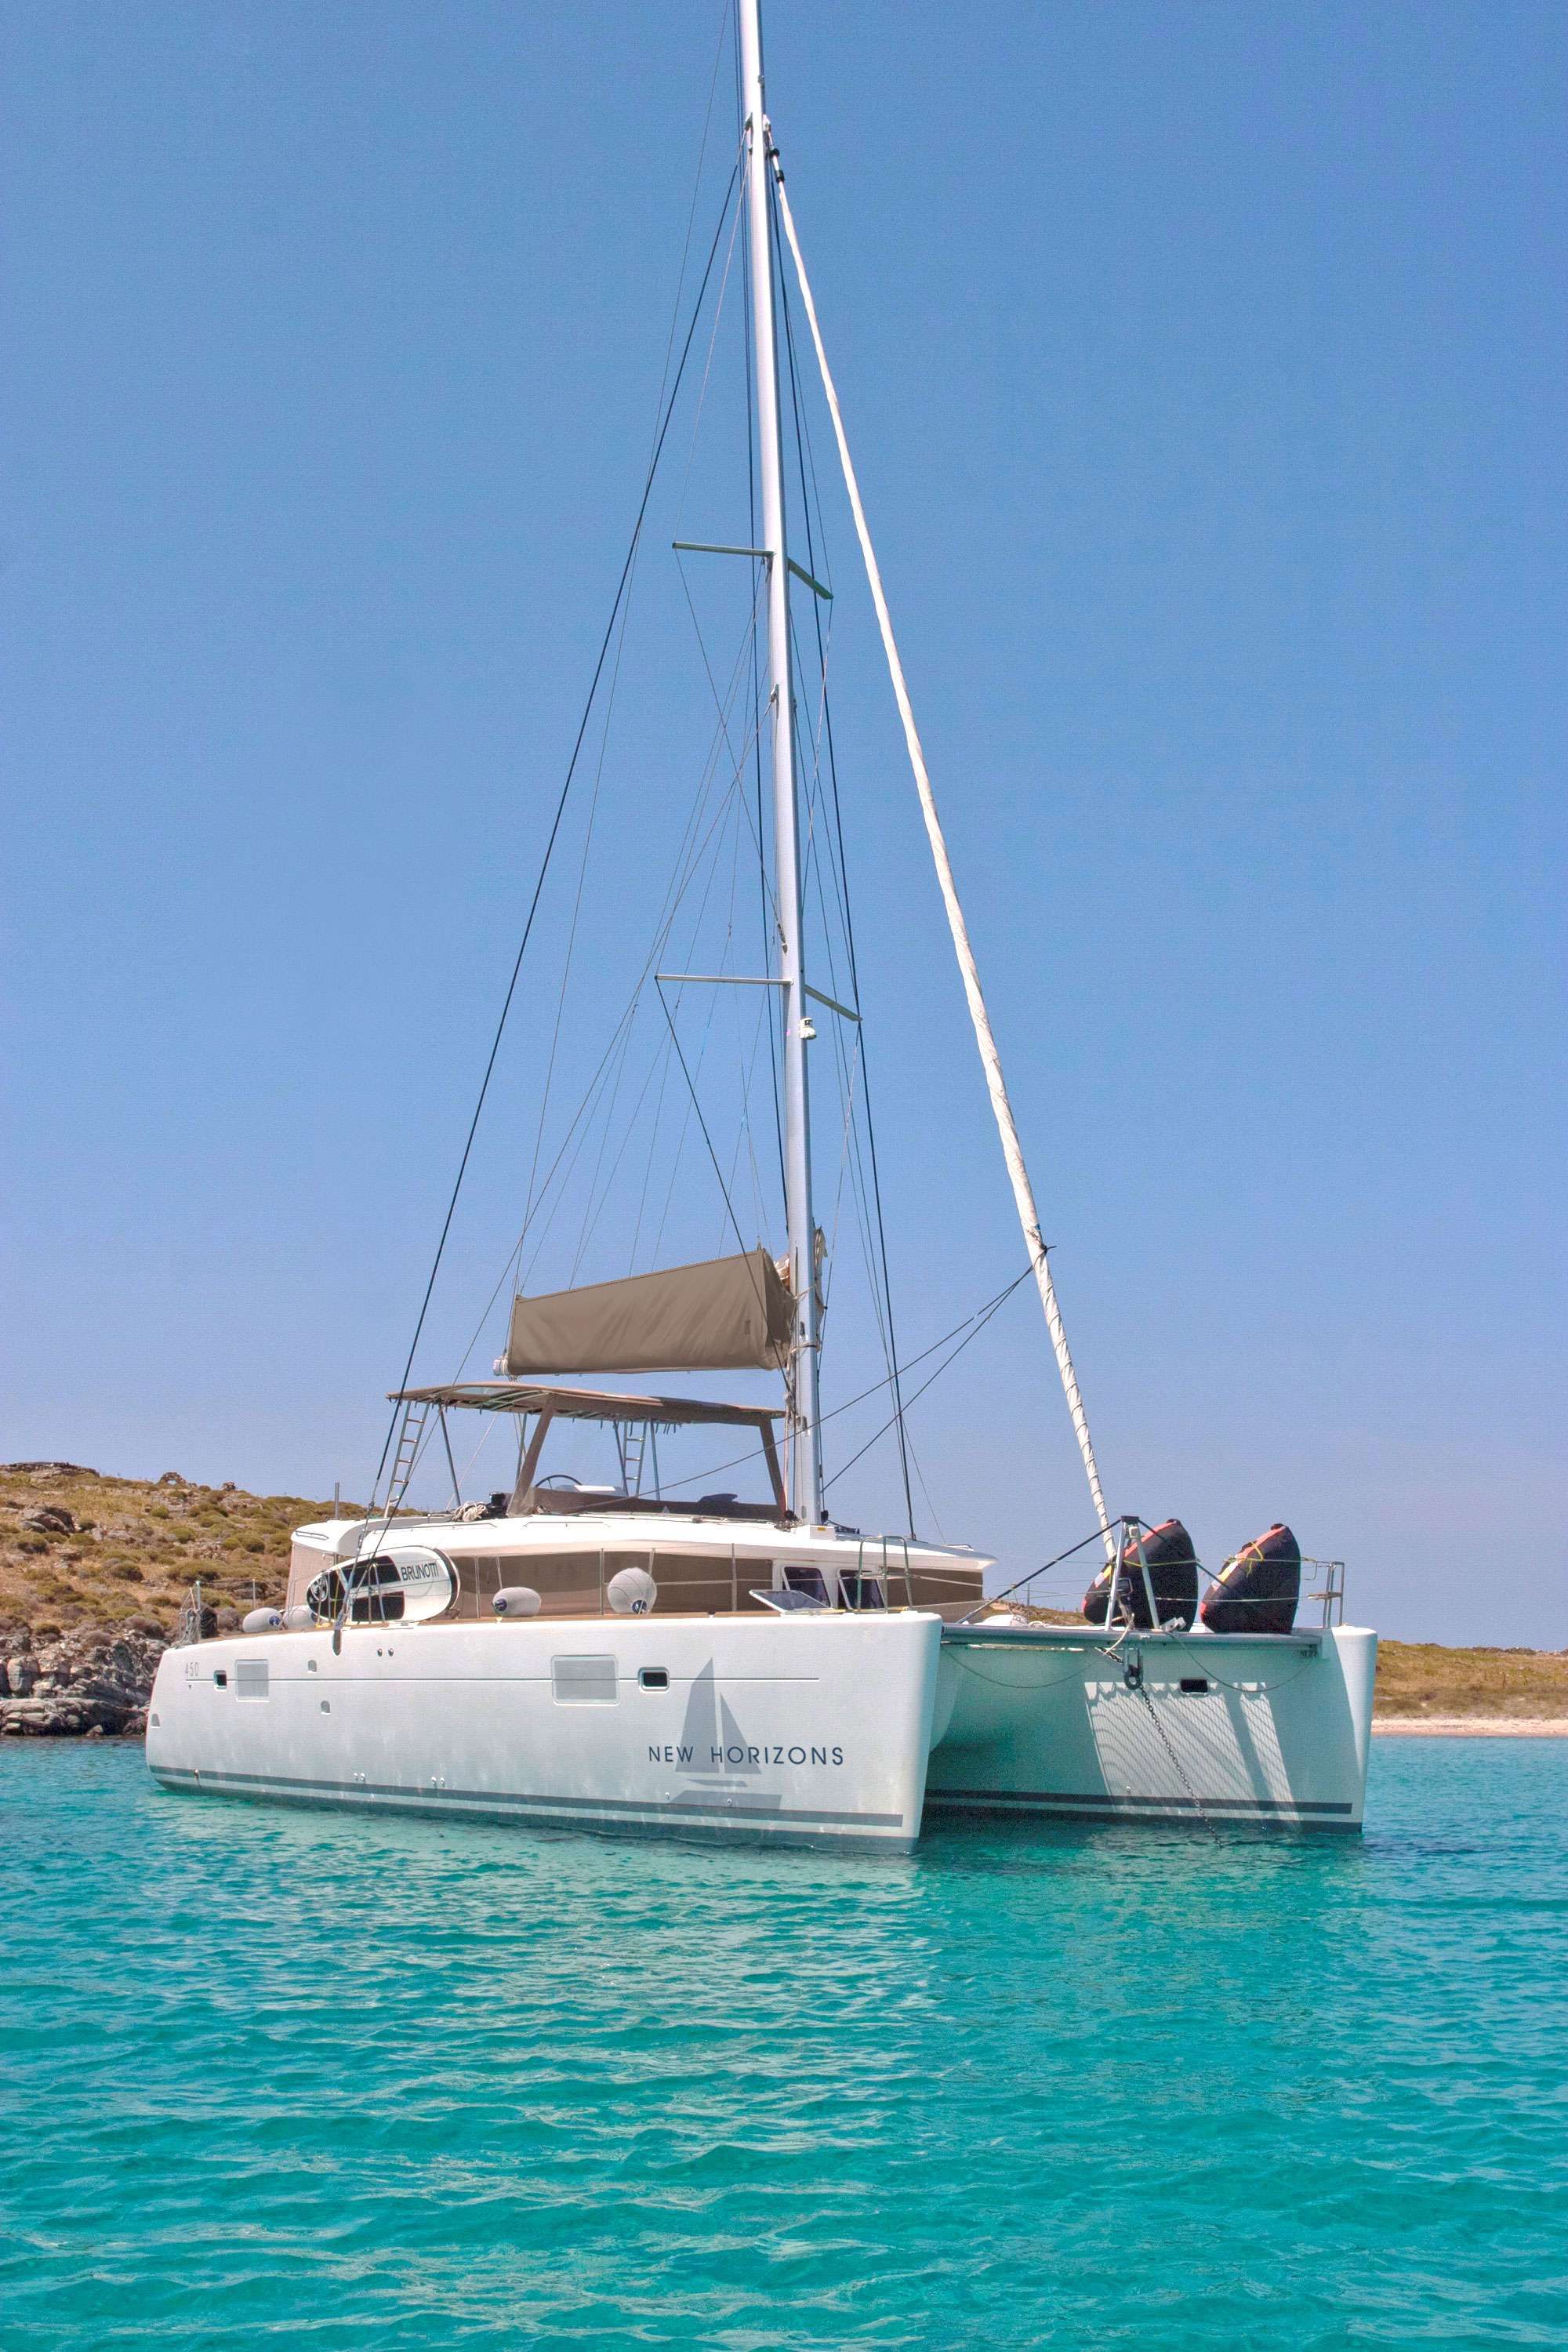 S/Y NEW HORIZONSLAGOON 450NOW IN BLUE EXTERIOR(2019)BUILT 2014 / REFIT 20178 PAX / 4 DOUBLE CABINS(2 CABINS CAN CONVERT TO TWIN BEDS)2 CREWBASED IN ATHENS,GREECE